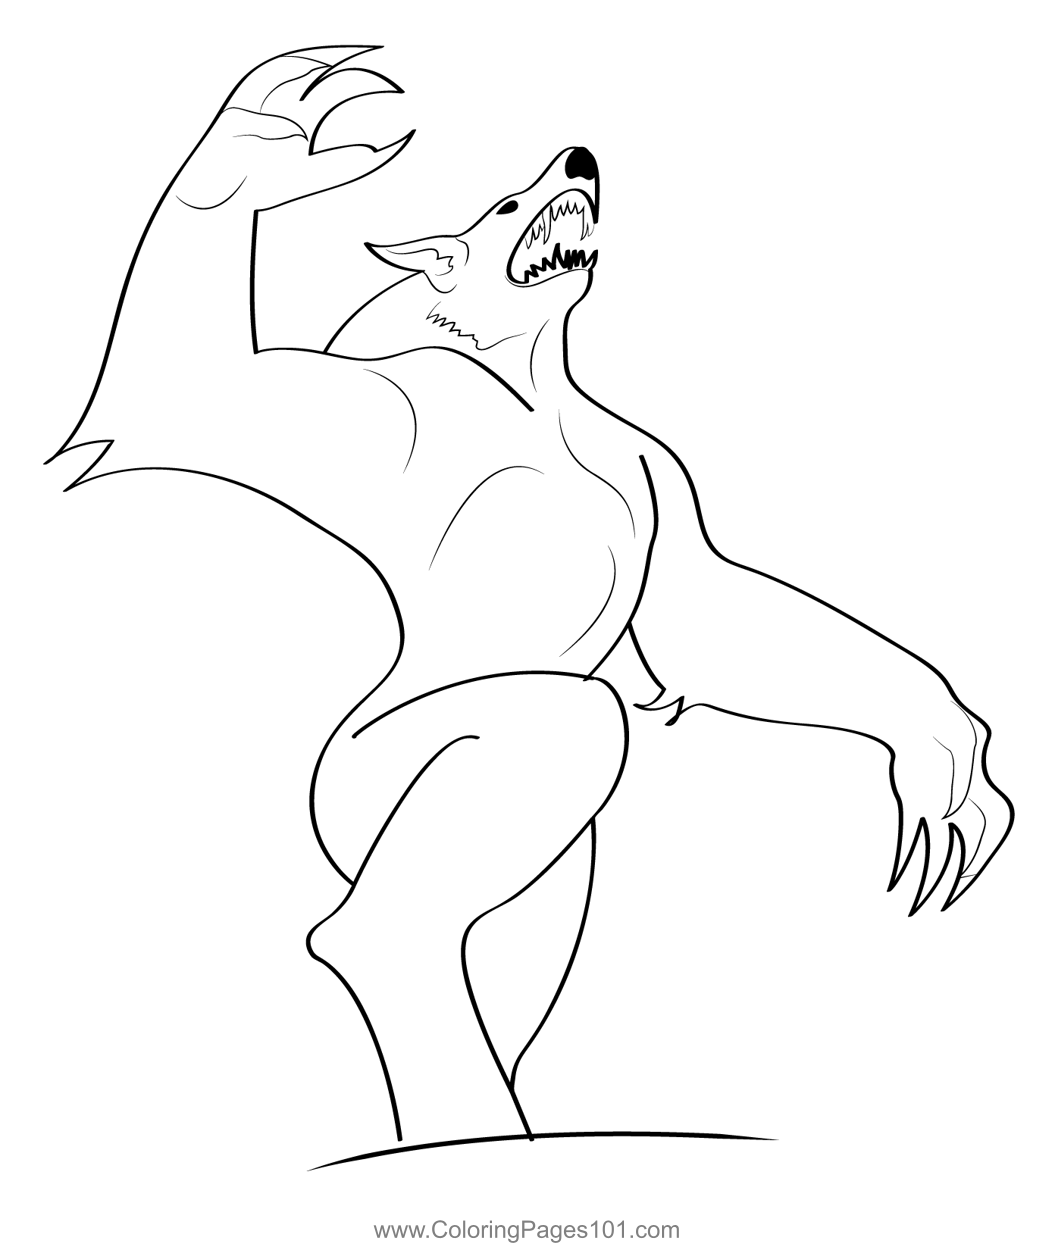 werewolf3-coloring-page-for-kids-free-werewolves-printable-coloring